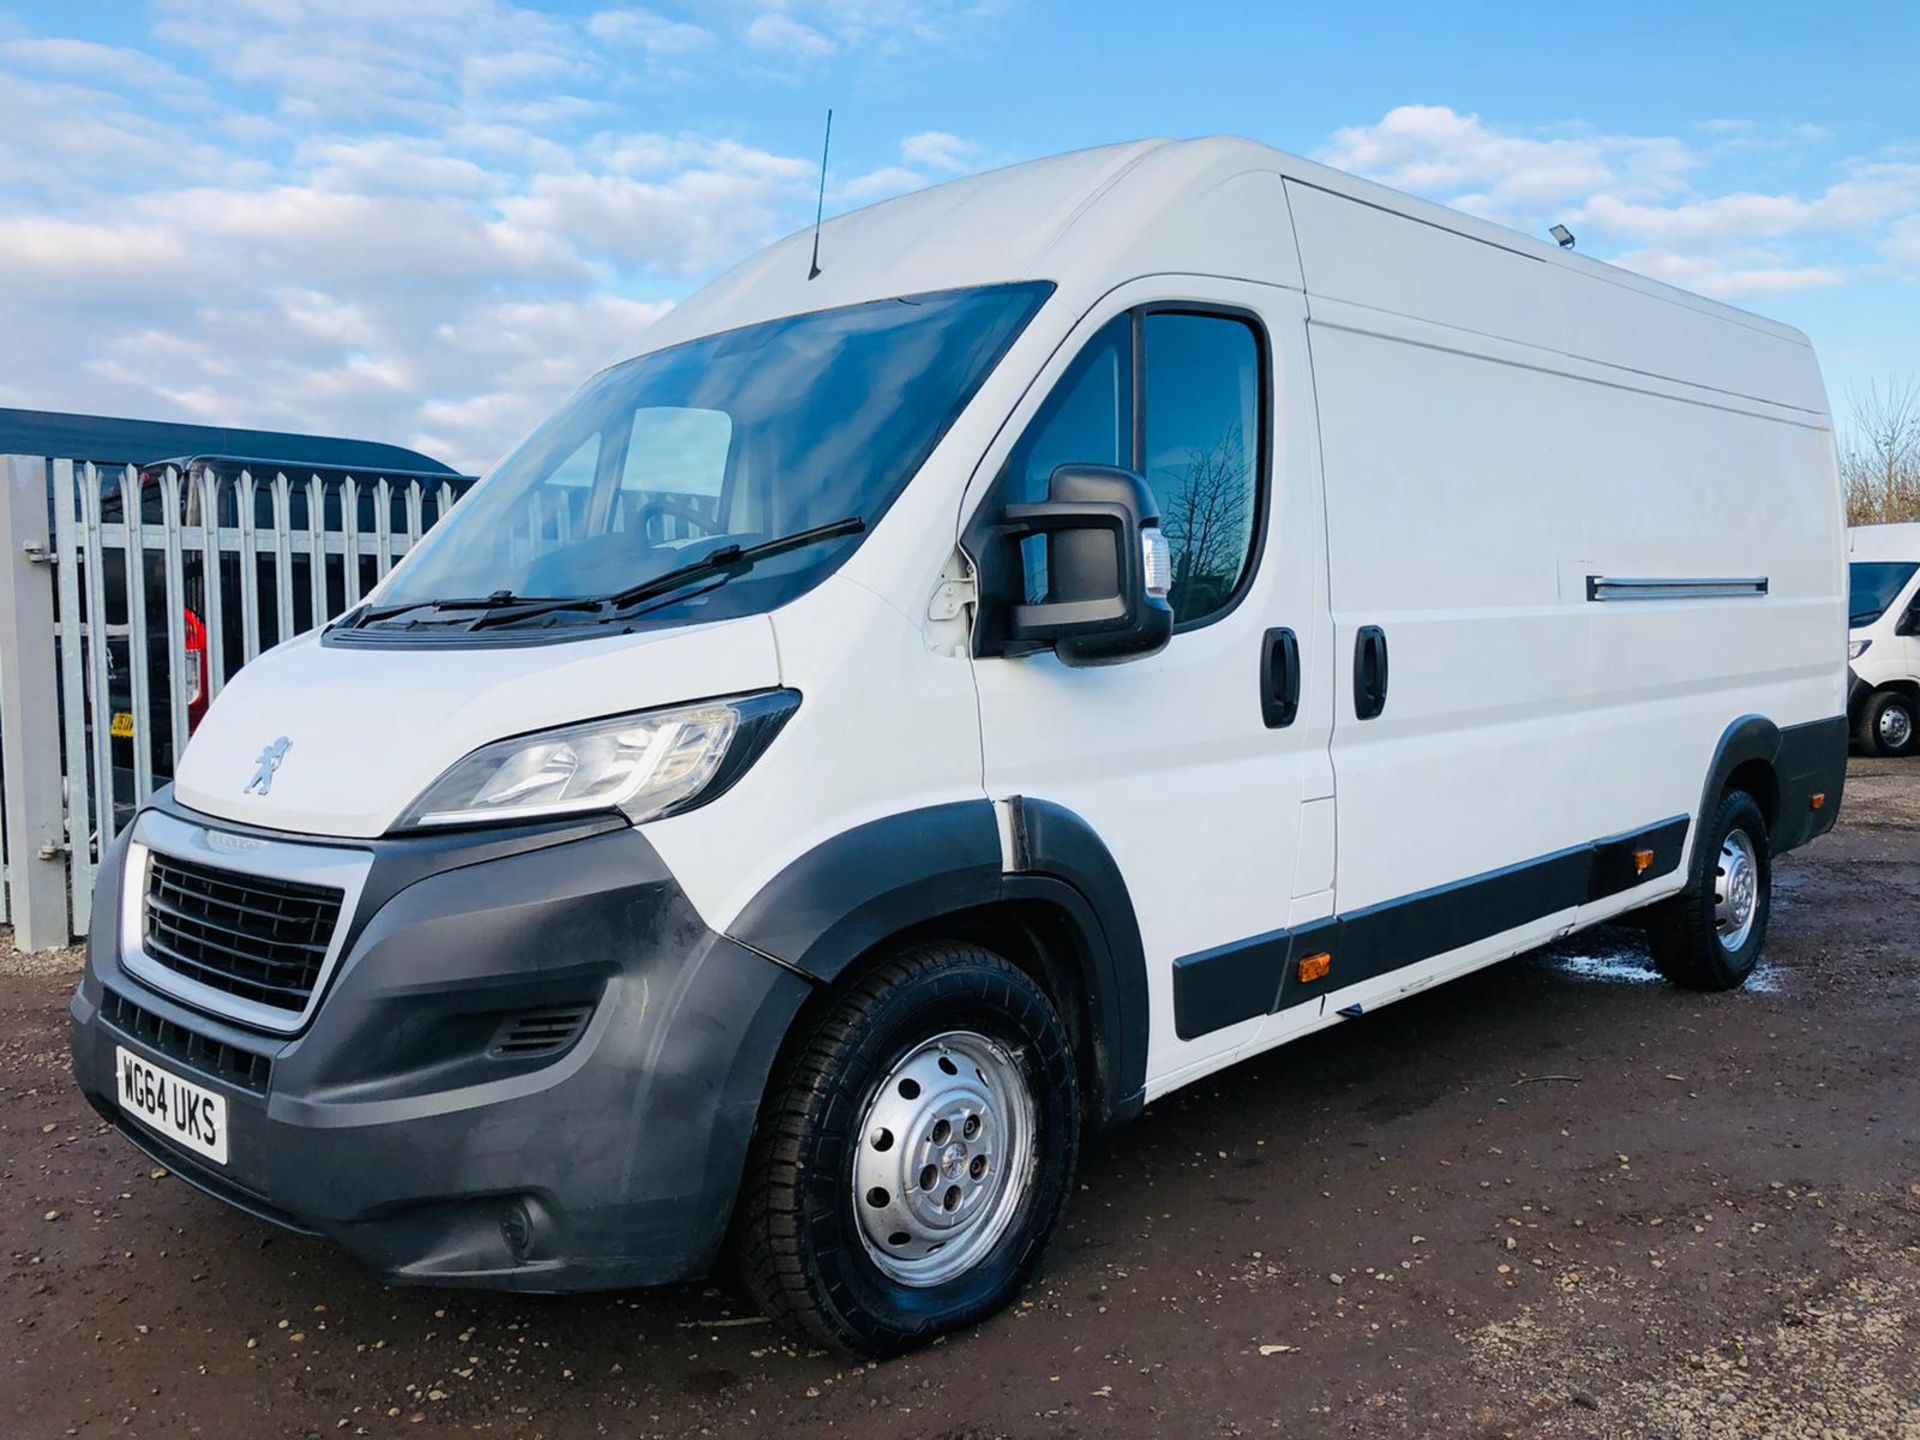 Peugeot Boxer 2.2 HDI 435 Professional L4 H2 2014 '64 Reg' Sat Nav - Air Con - Only Done 76K - Image 7 of 24